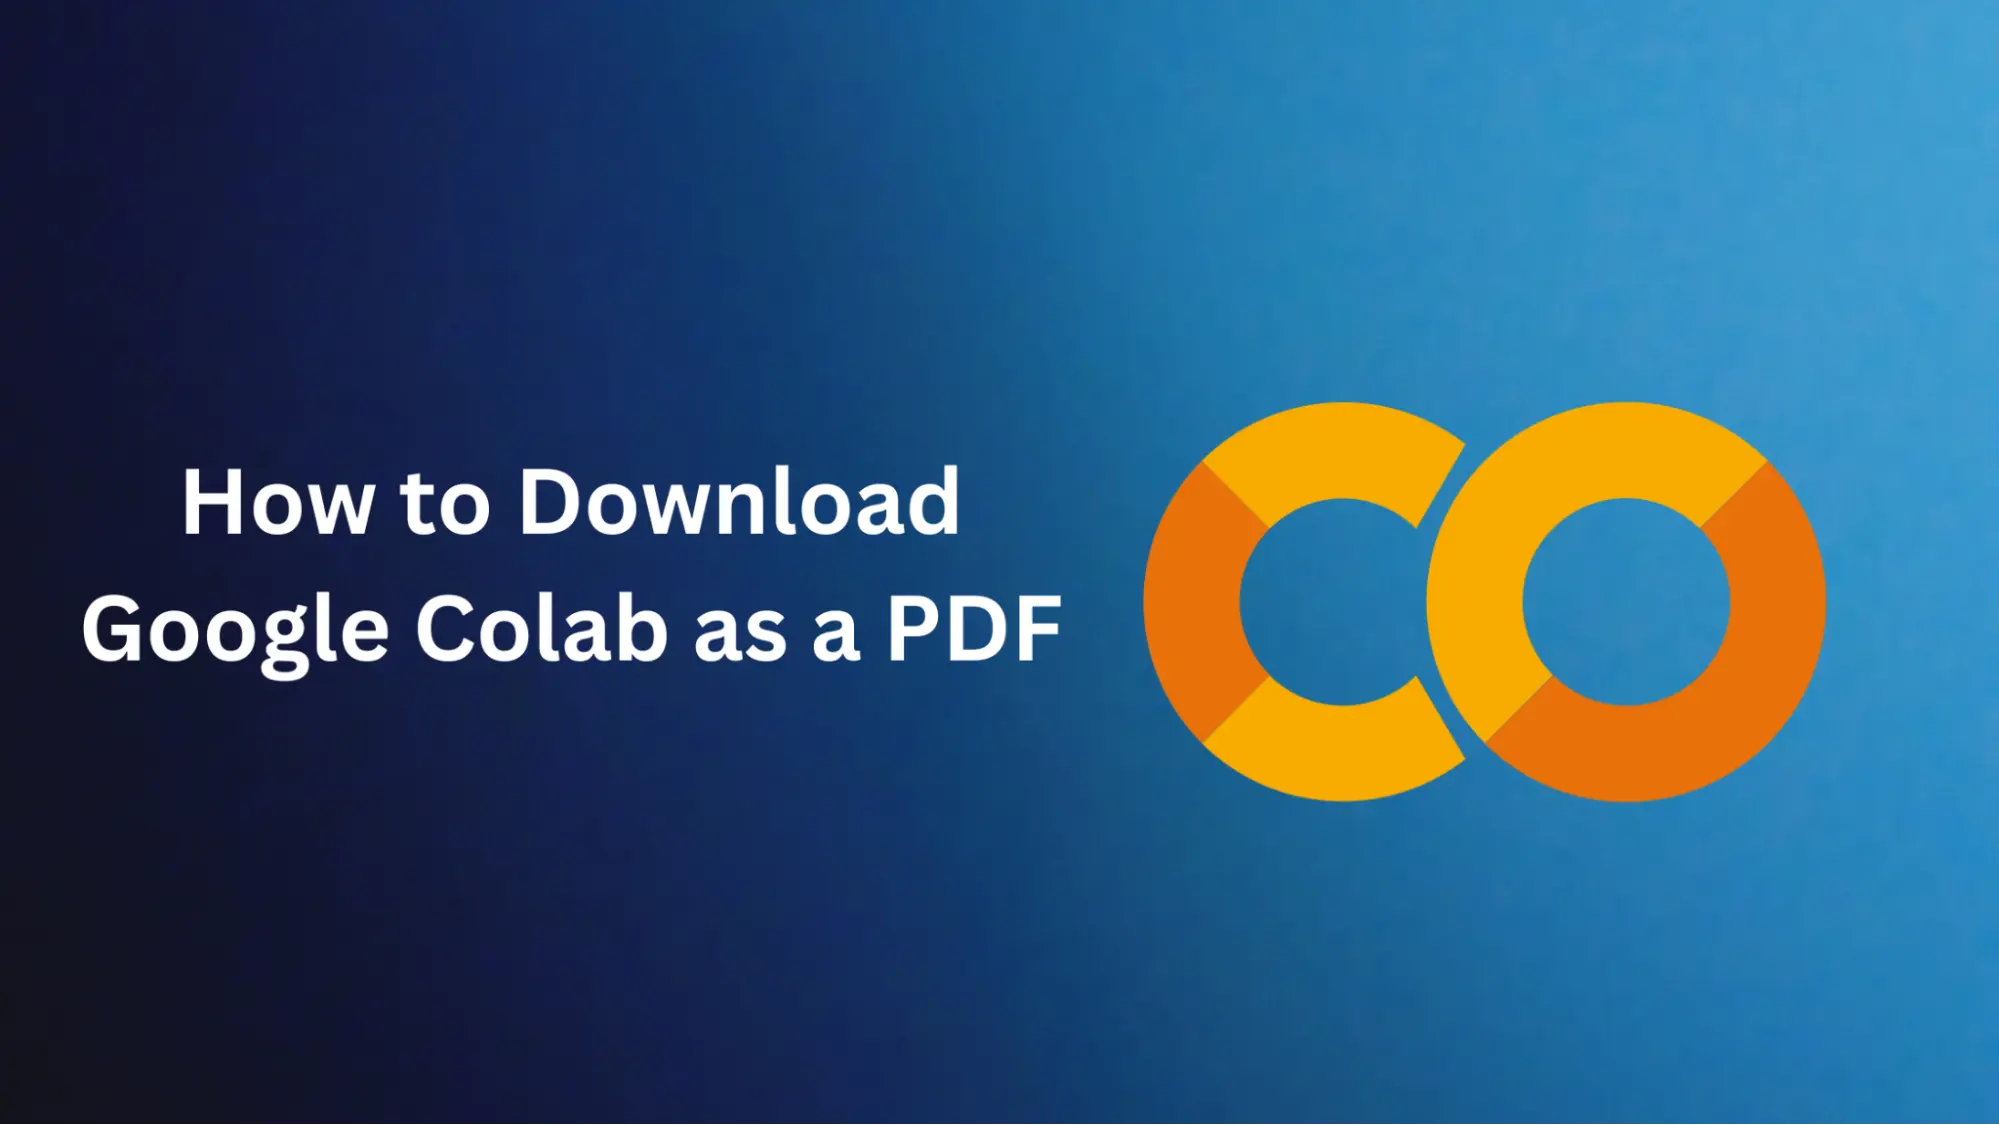 How to download Google Colab as a PDF